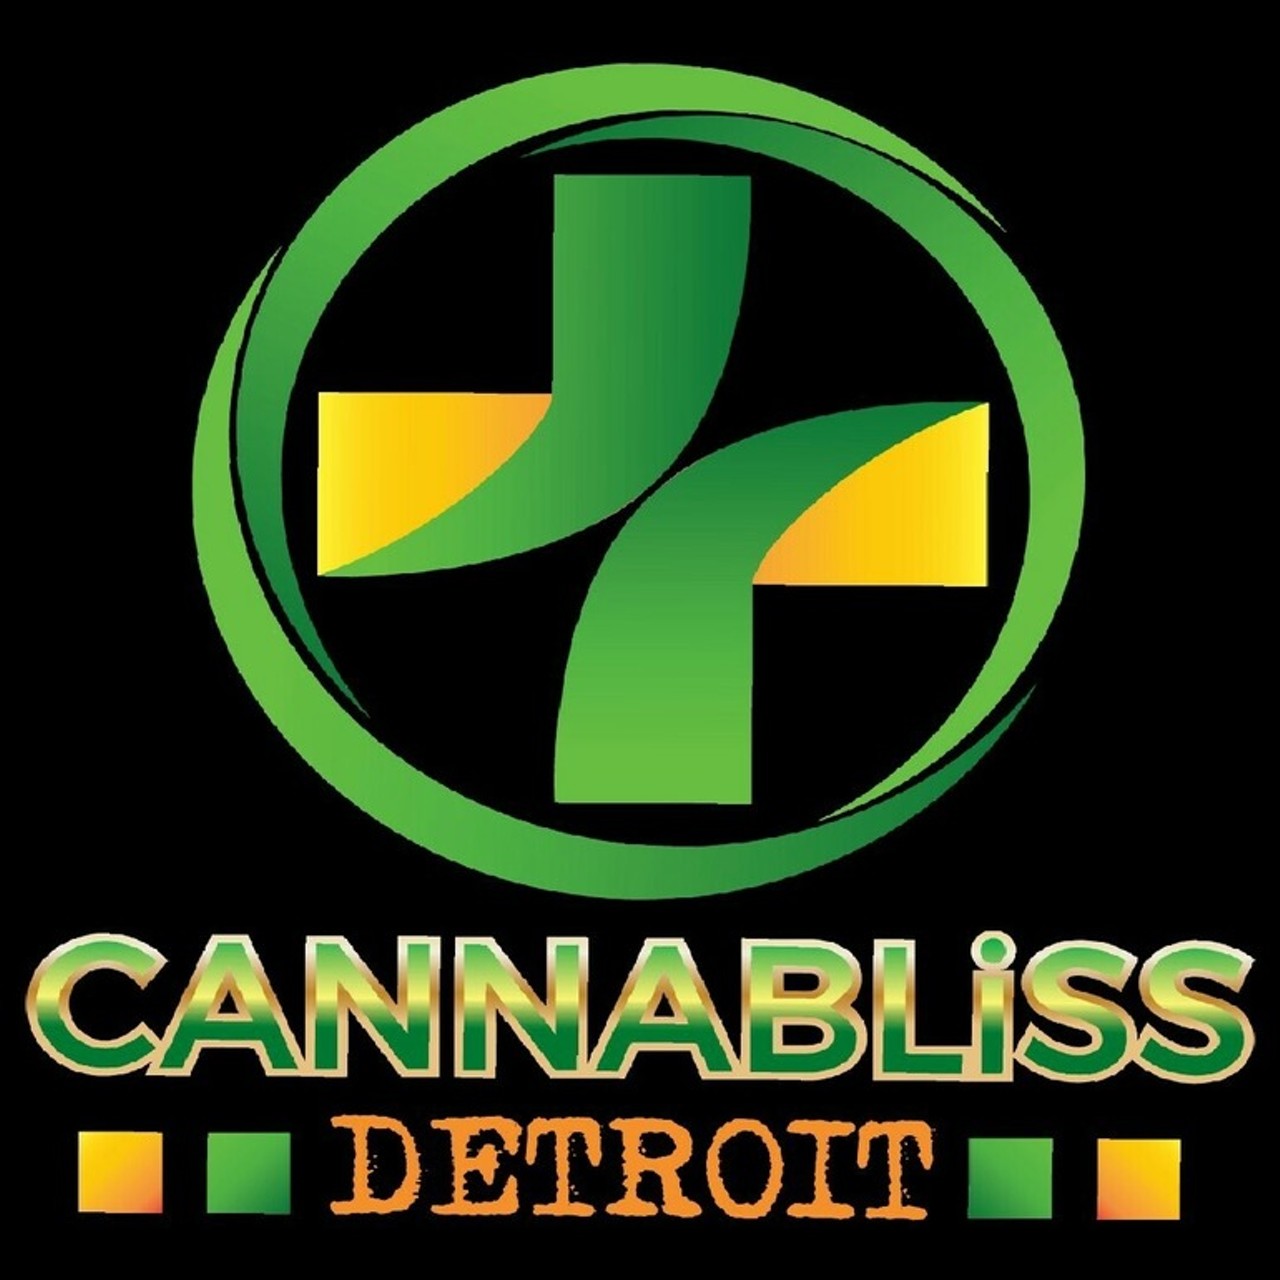 Canabliss Detroit
Great place for great deals on flowers and prerolls in North West Detroit. Veterans, military and seniors receive 10%.
24731 W. 8 Mile Road&nbsp;Detroit,&nbsp;MI&nbsp;48219
(313) 693-4474